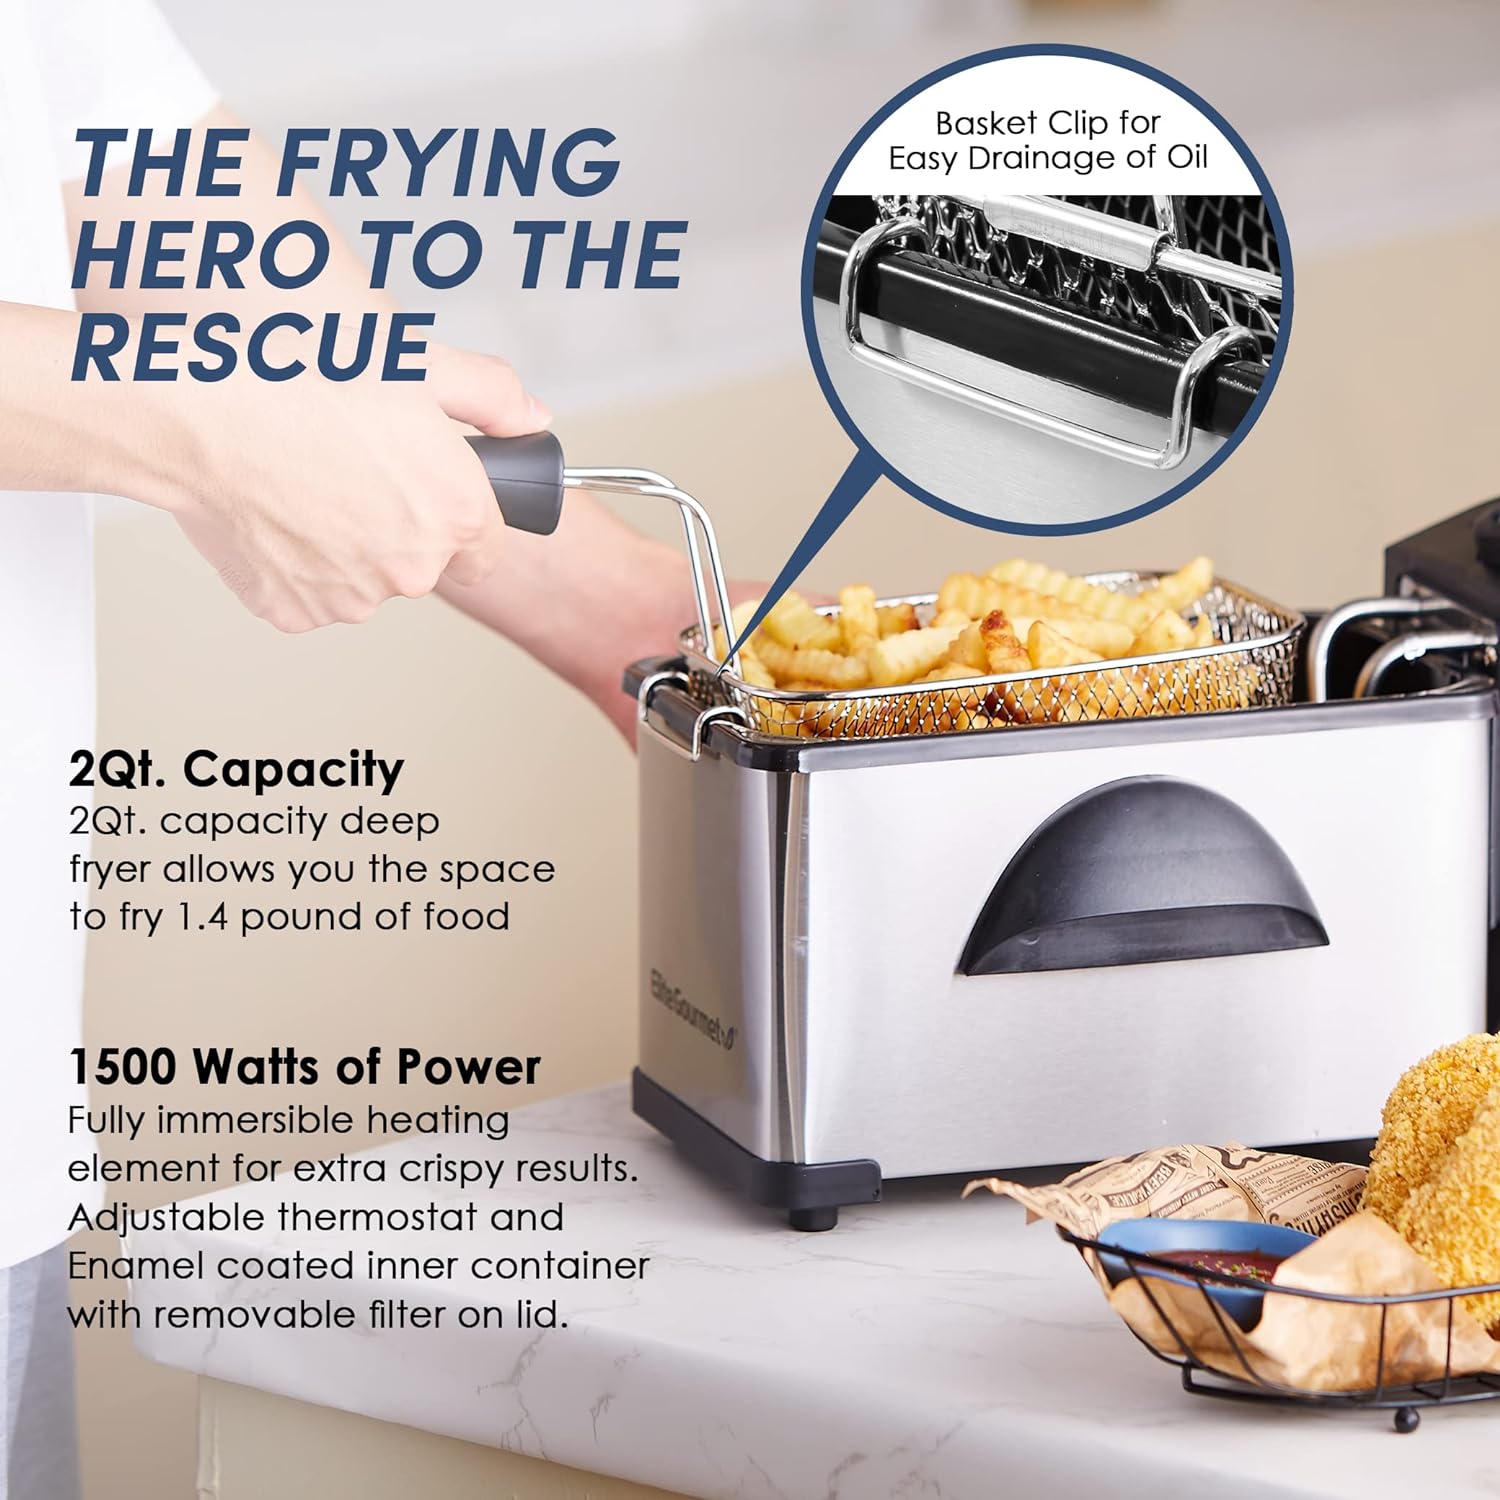 Elite Gourmet EDF2100 Electric Immersion Deep Fryer Removable Basket Adjustable Temperature, Lid with Viewing Window and Odor Free Filter, 2 Quart / 8.2 cup